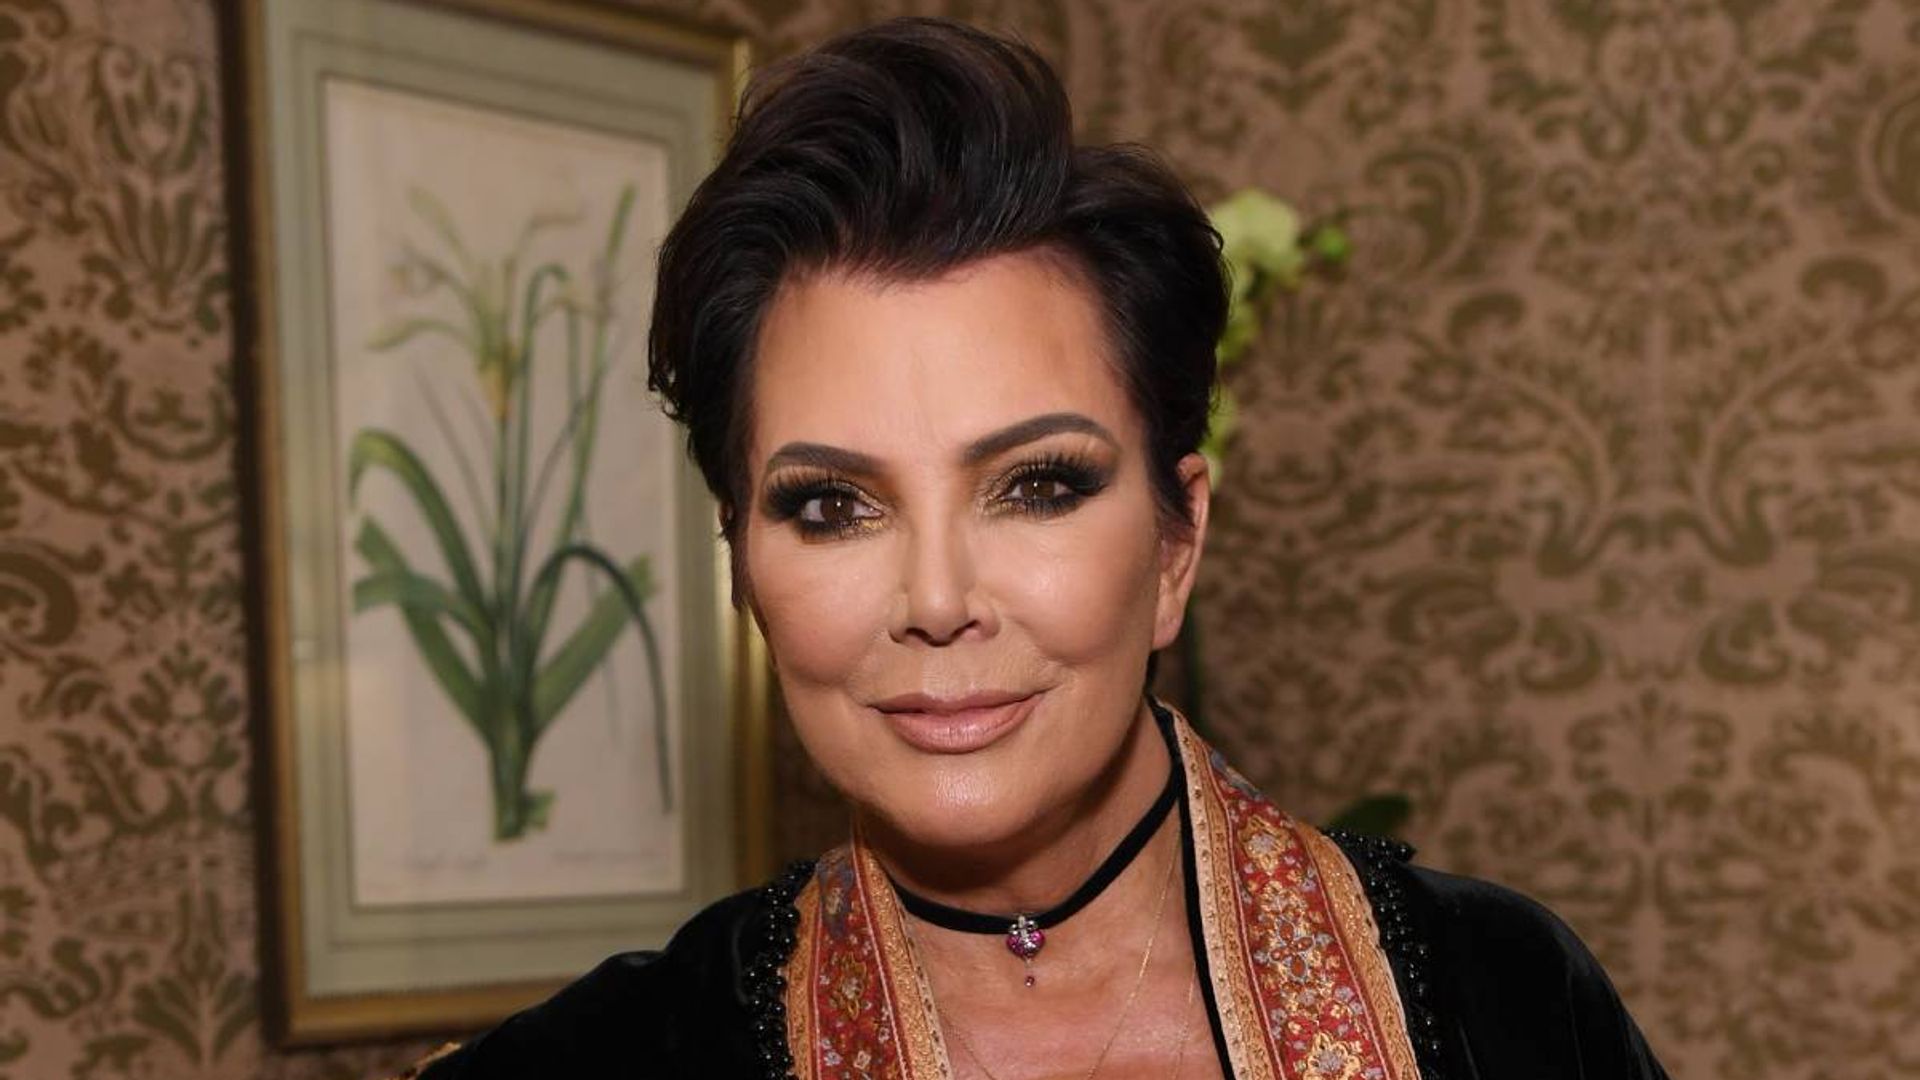 Kris Jenner stuns with full fringe and chic bob in incredible throwback photo